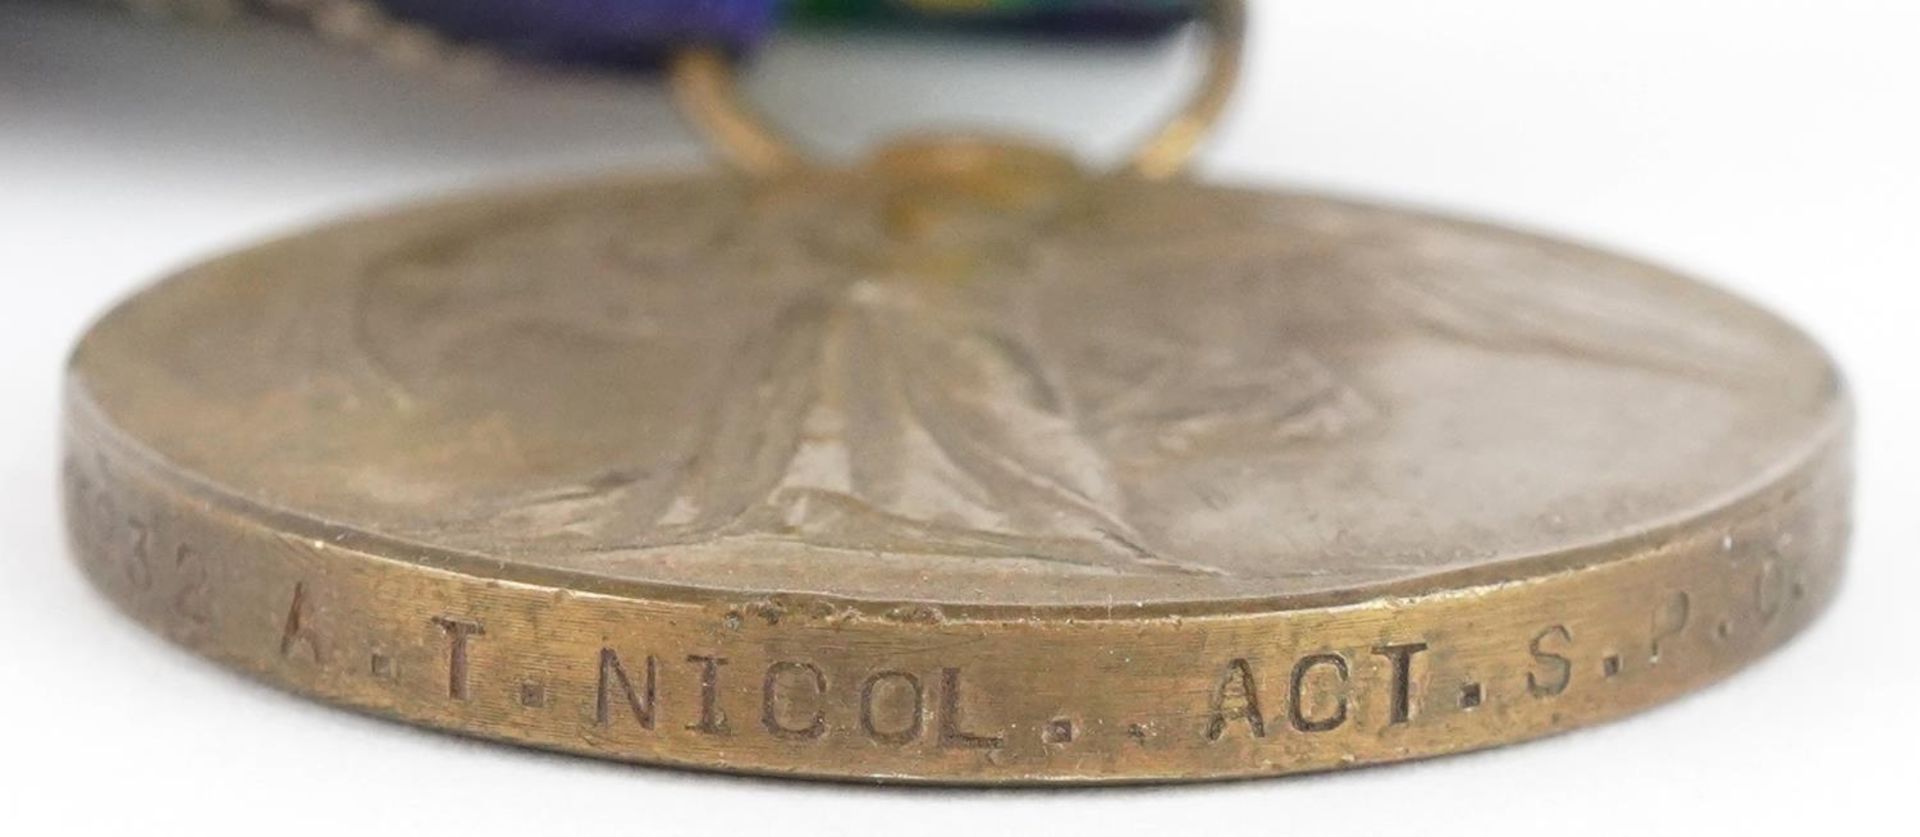 British military World War I trio awarded to K.15932.A.T.NICOL,ACT.L.STO.R.N. - Image 5 of 5